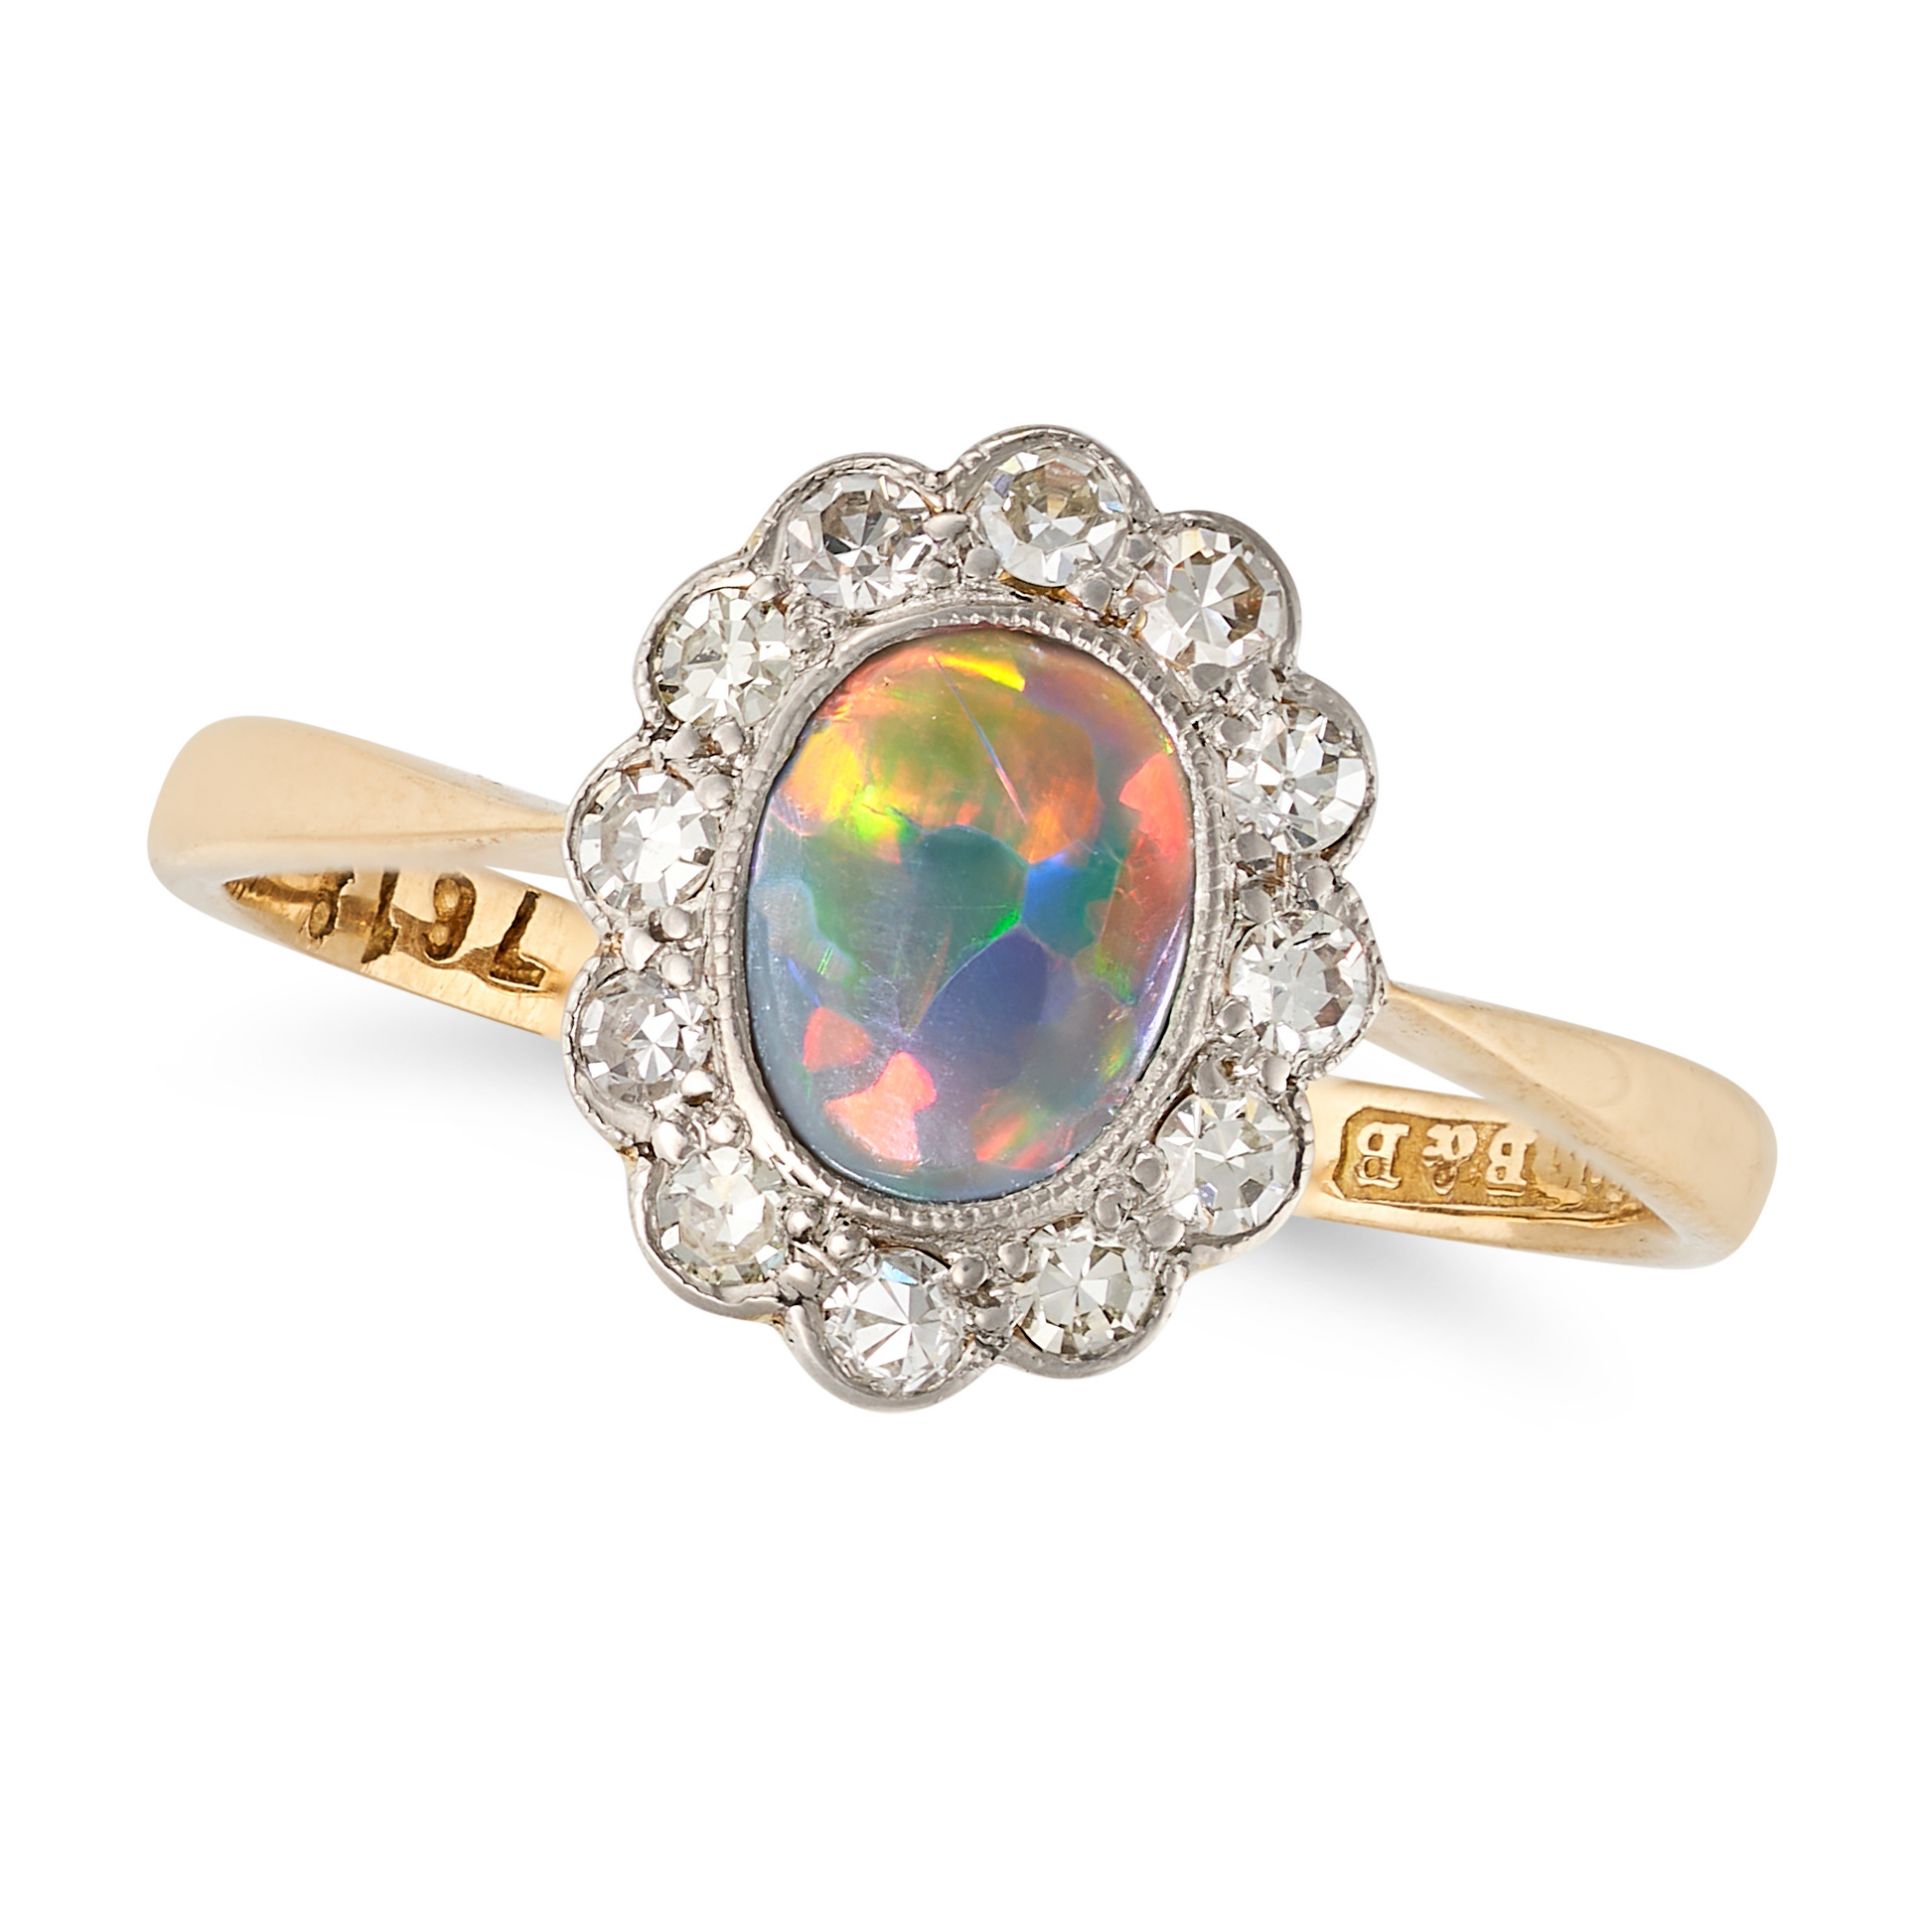 A BLACK OPAL AND DIAMOND CLUSTER RING in 18ct yellow gold, set with a cabochon black opal in a cl...